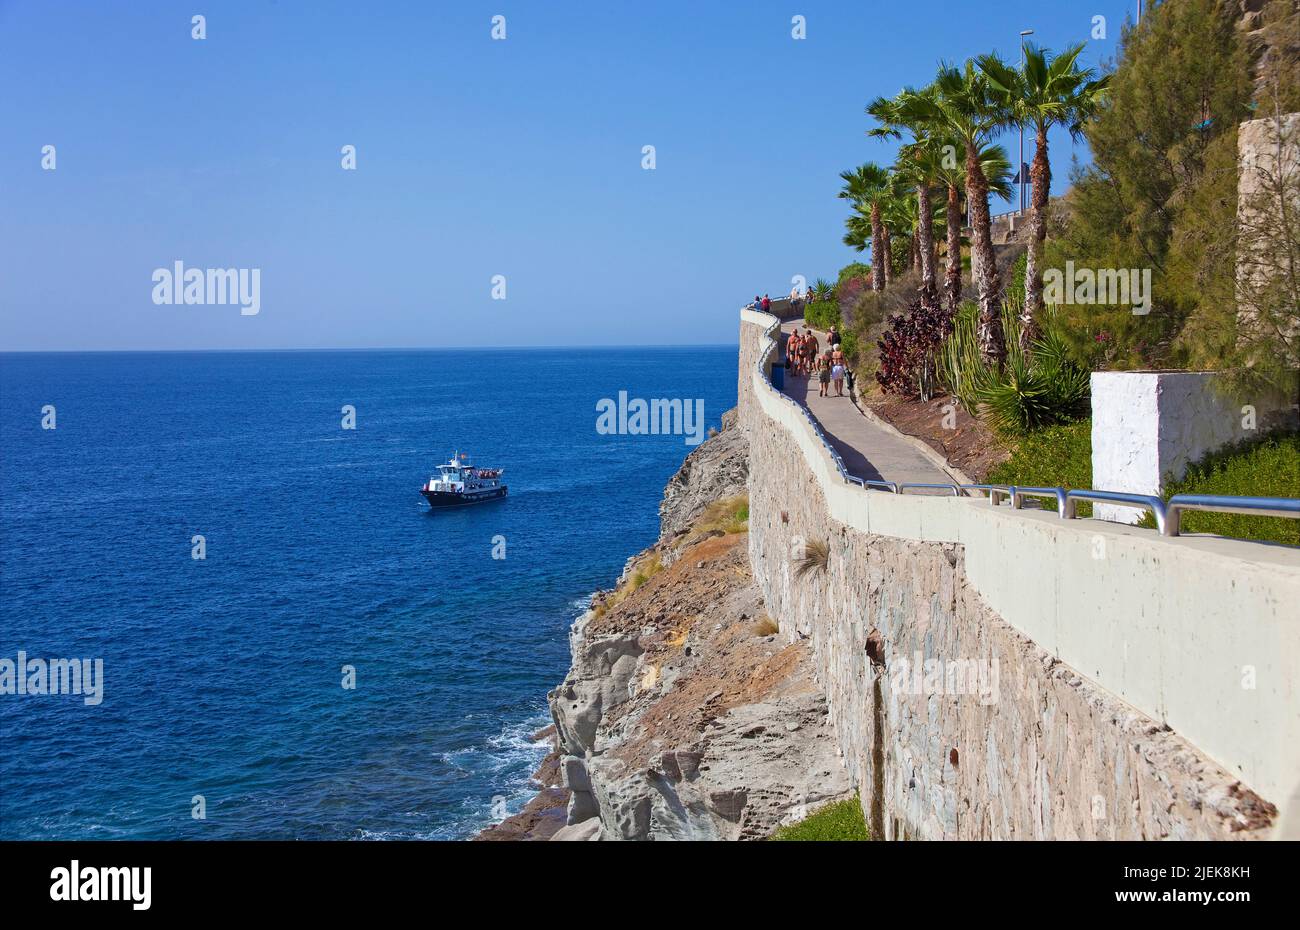 Pedestrian path from Puerto Rico to Amadores beach, Grand Canary, Canary islands, Spain, Europe Stock Photo